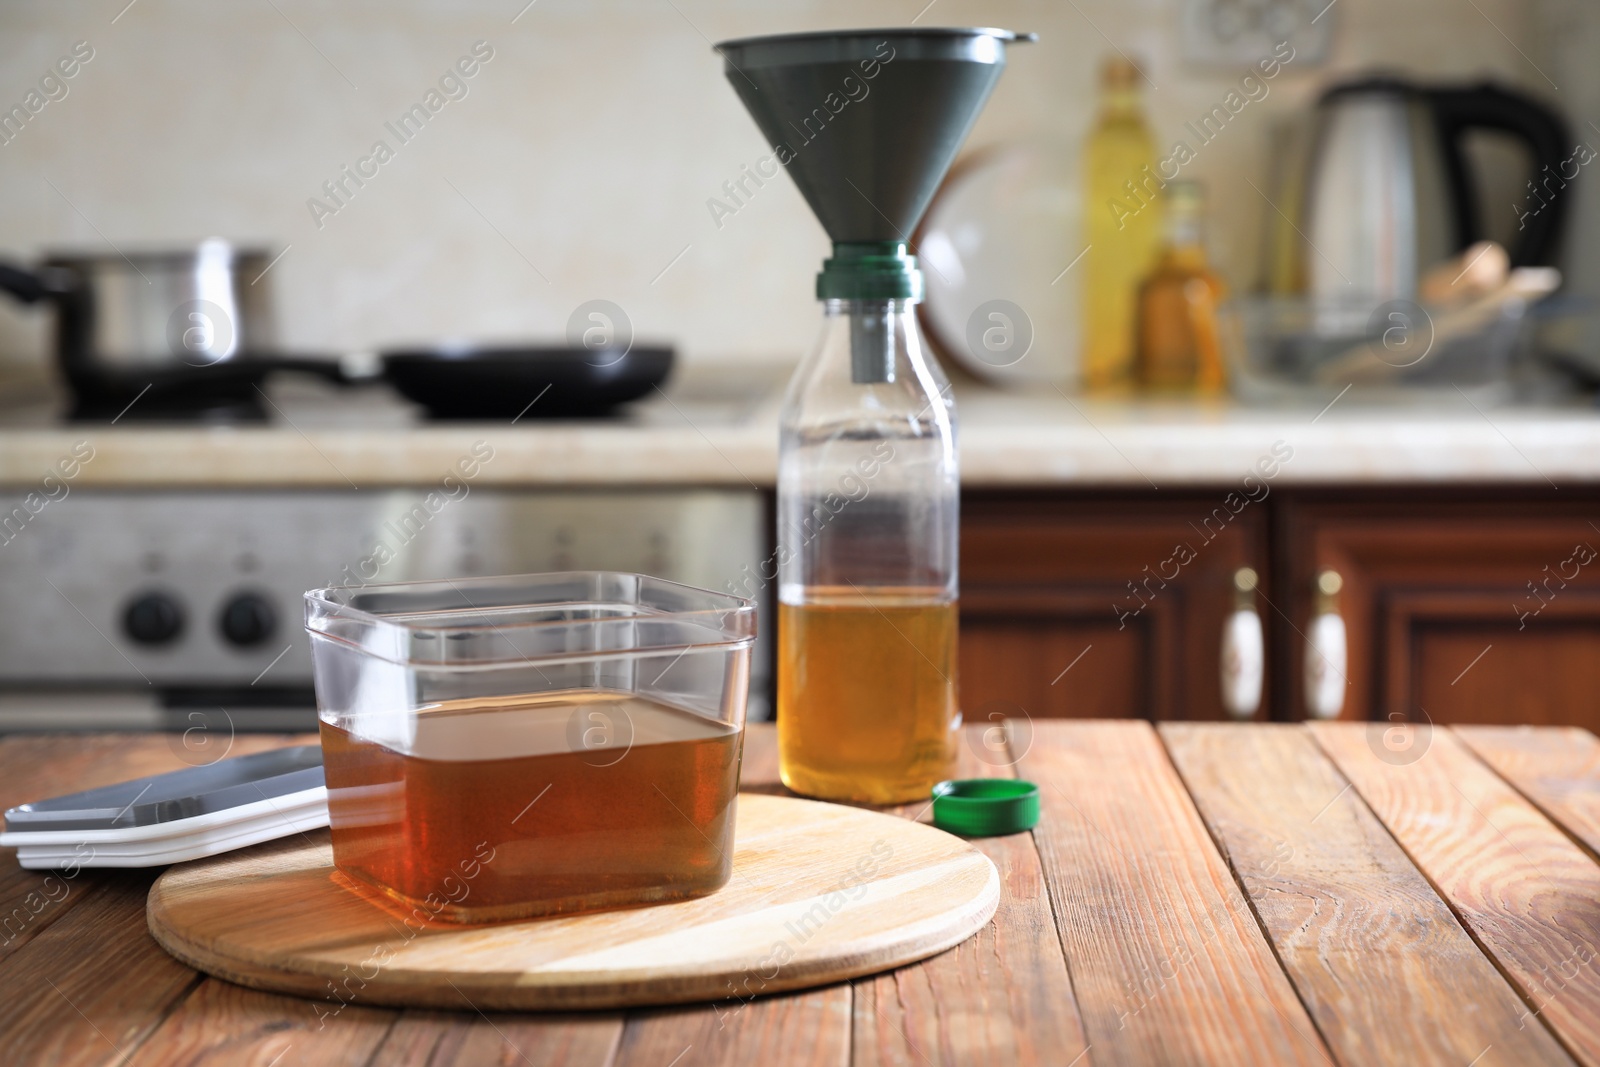 Photo of Used cooking oil on wooden table in kitchen, space for text